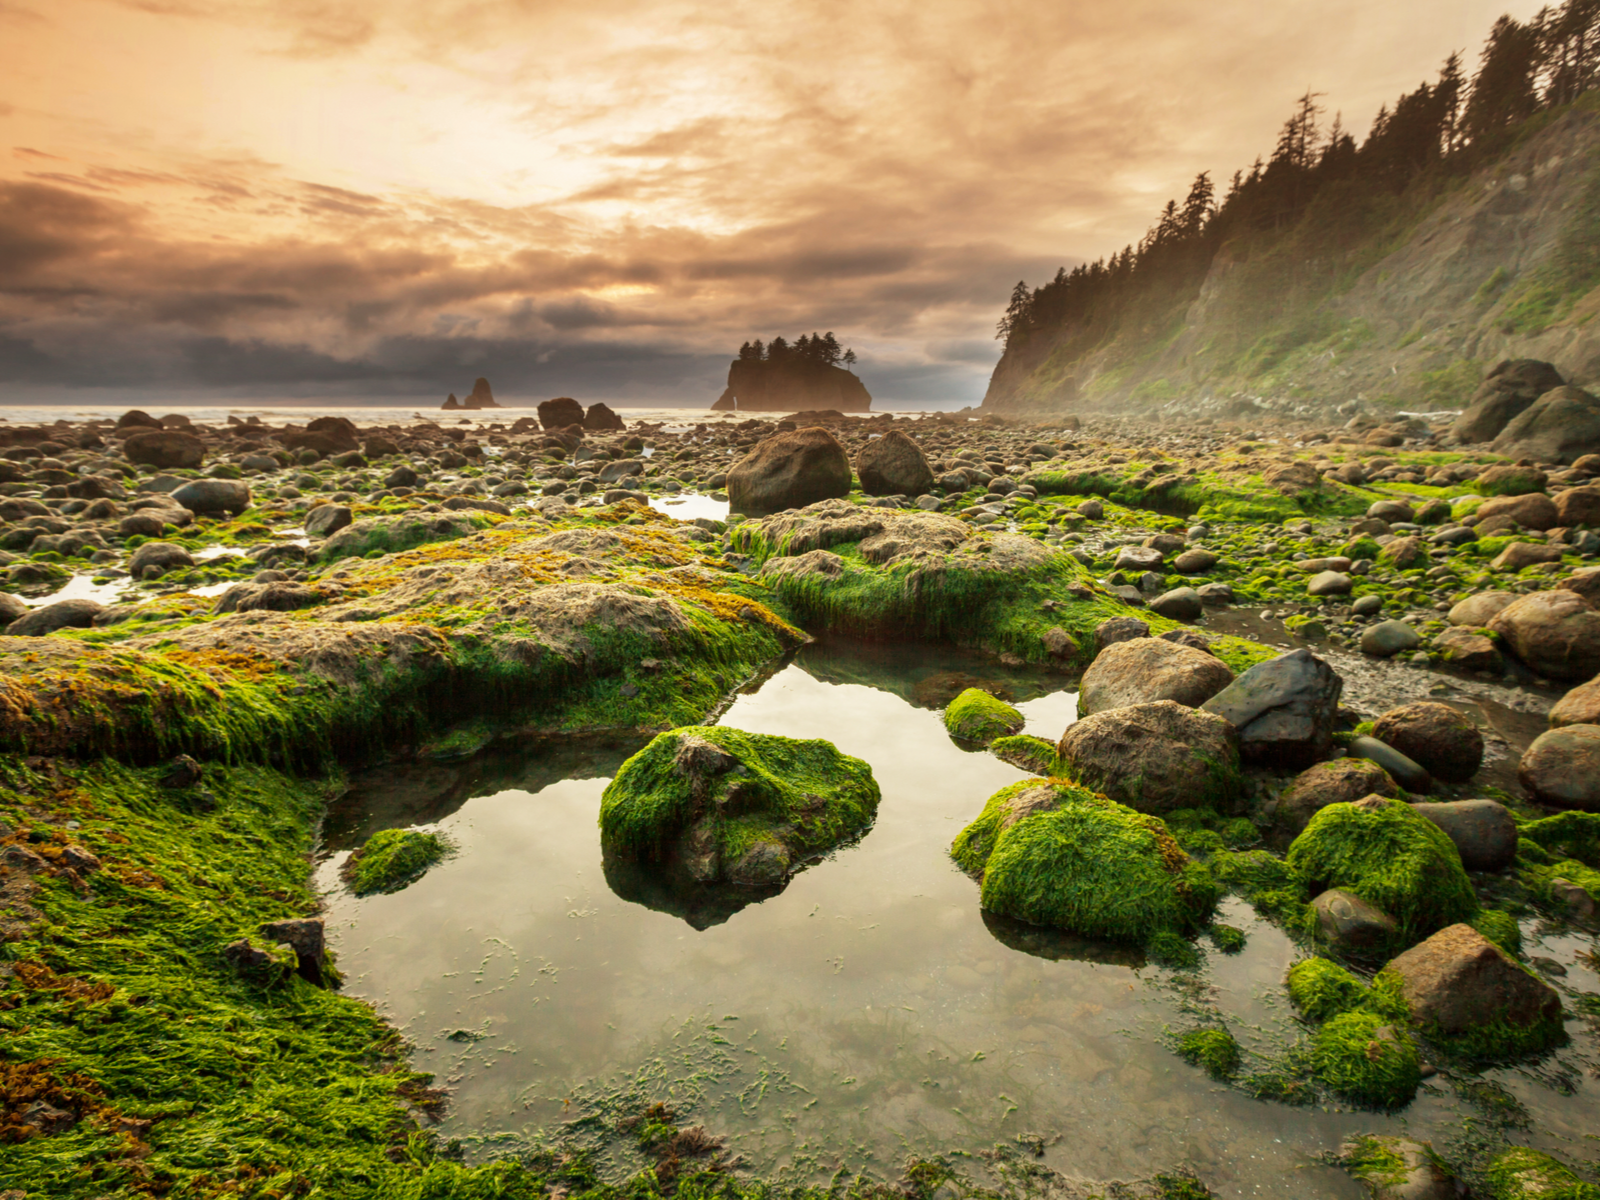 Gorgeous dusk view of one of the best places to visit in Washington State, Olympic National Park, with fog on the horizon